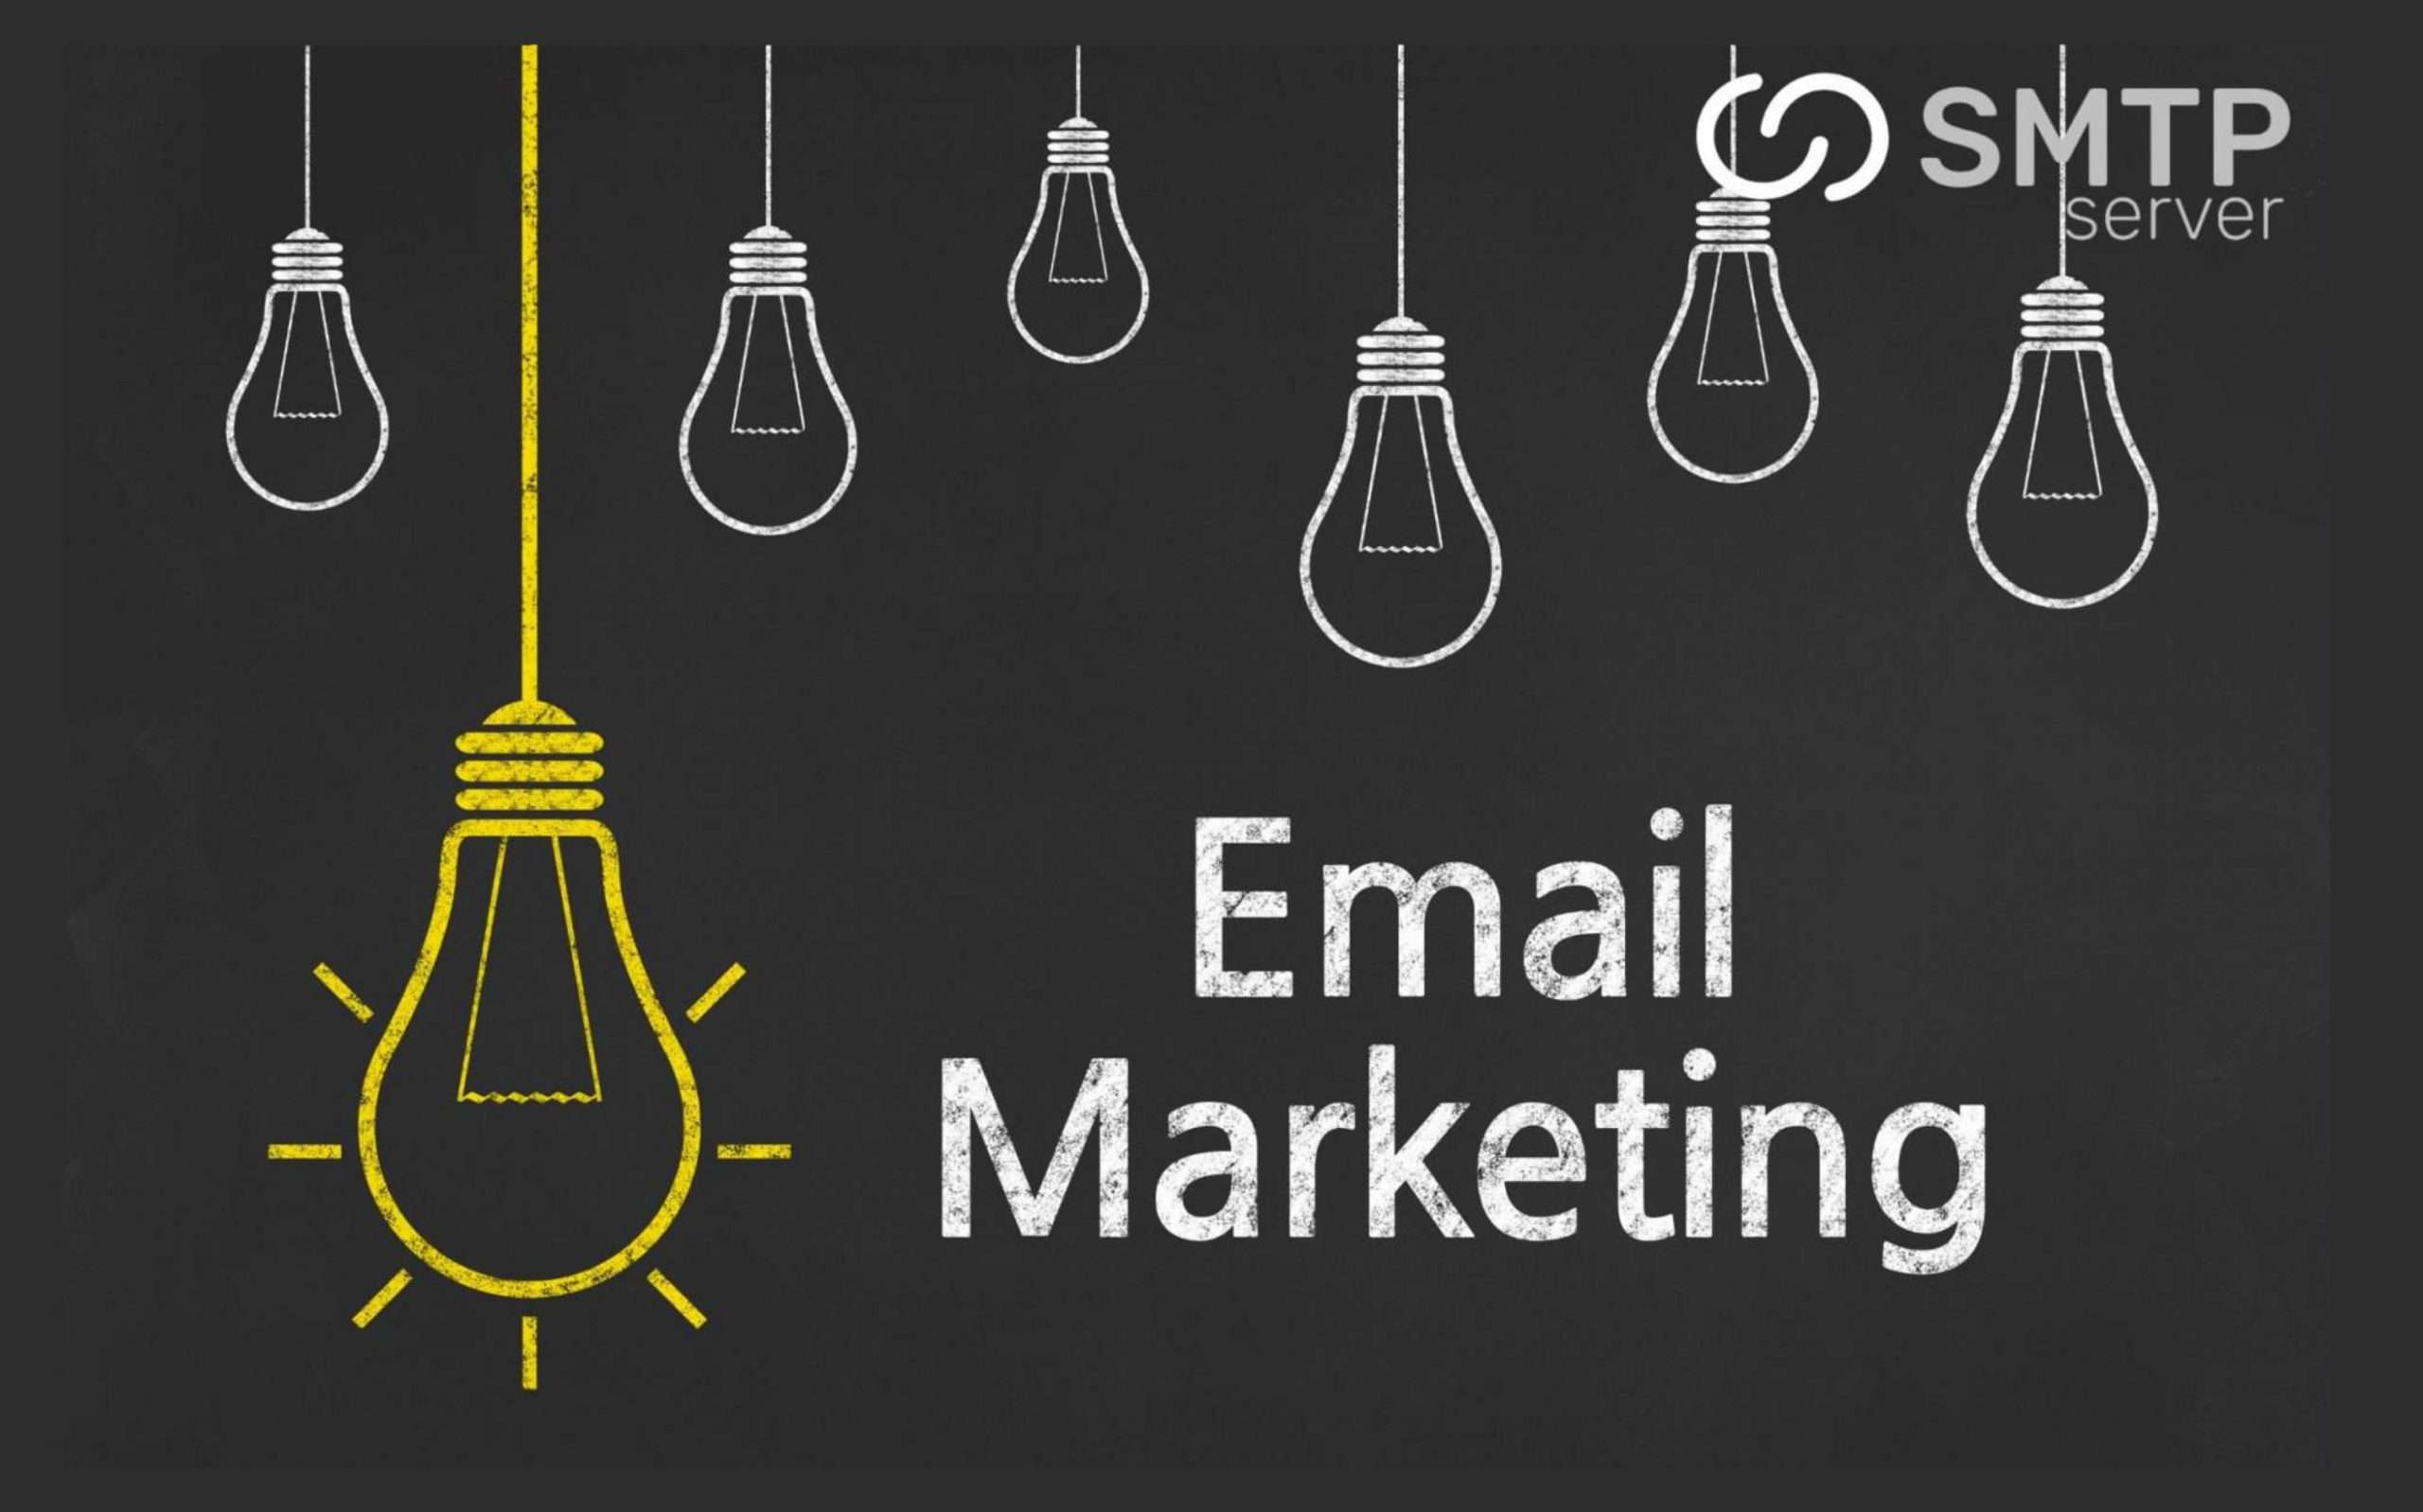 The Benefits of Using an SMTP Server for Email Marketing